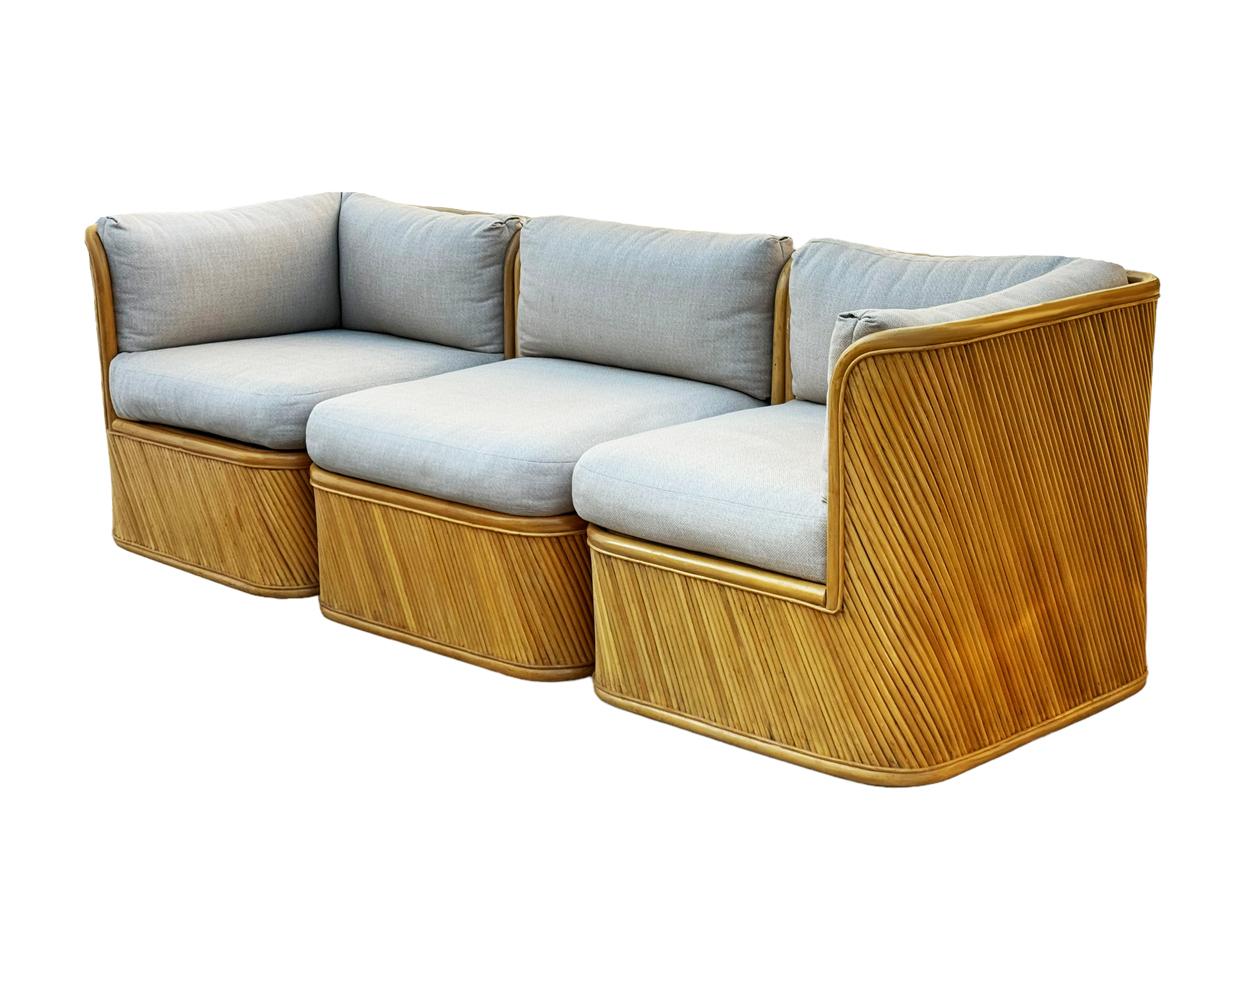 American Mid-Century Modern Bamboo Pencil Reed Modular or Sectional Sofa with New Cushion For Sale